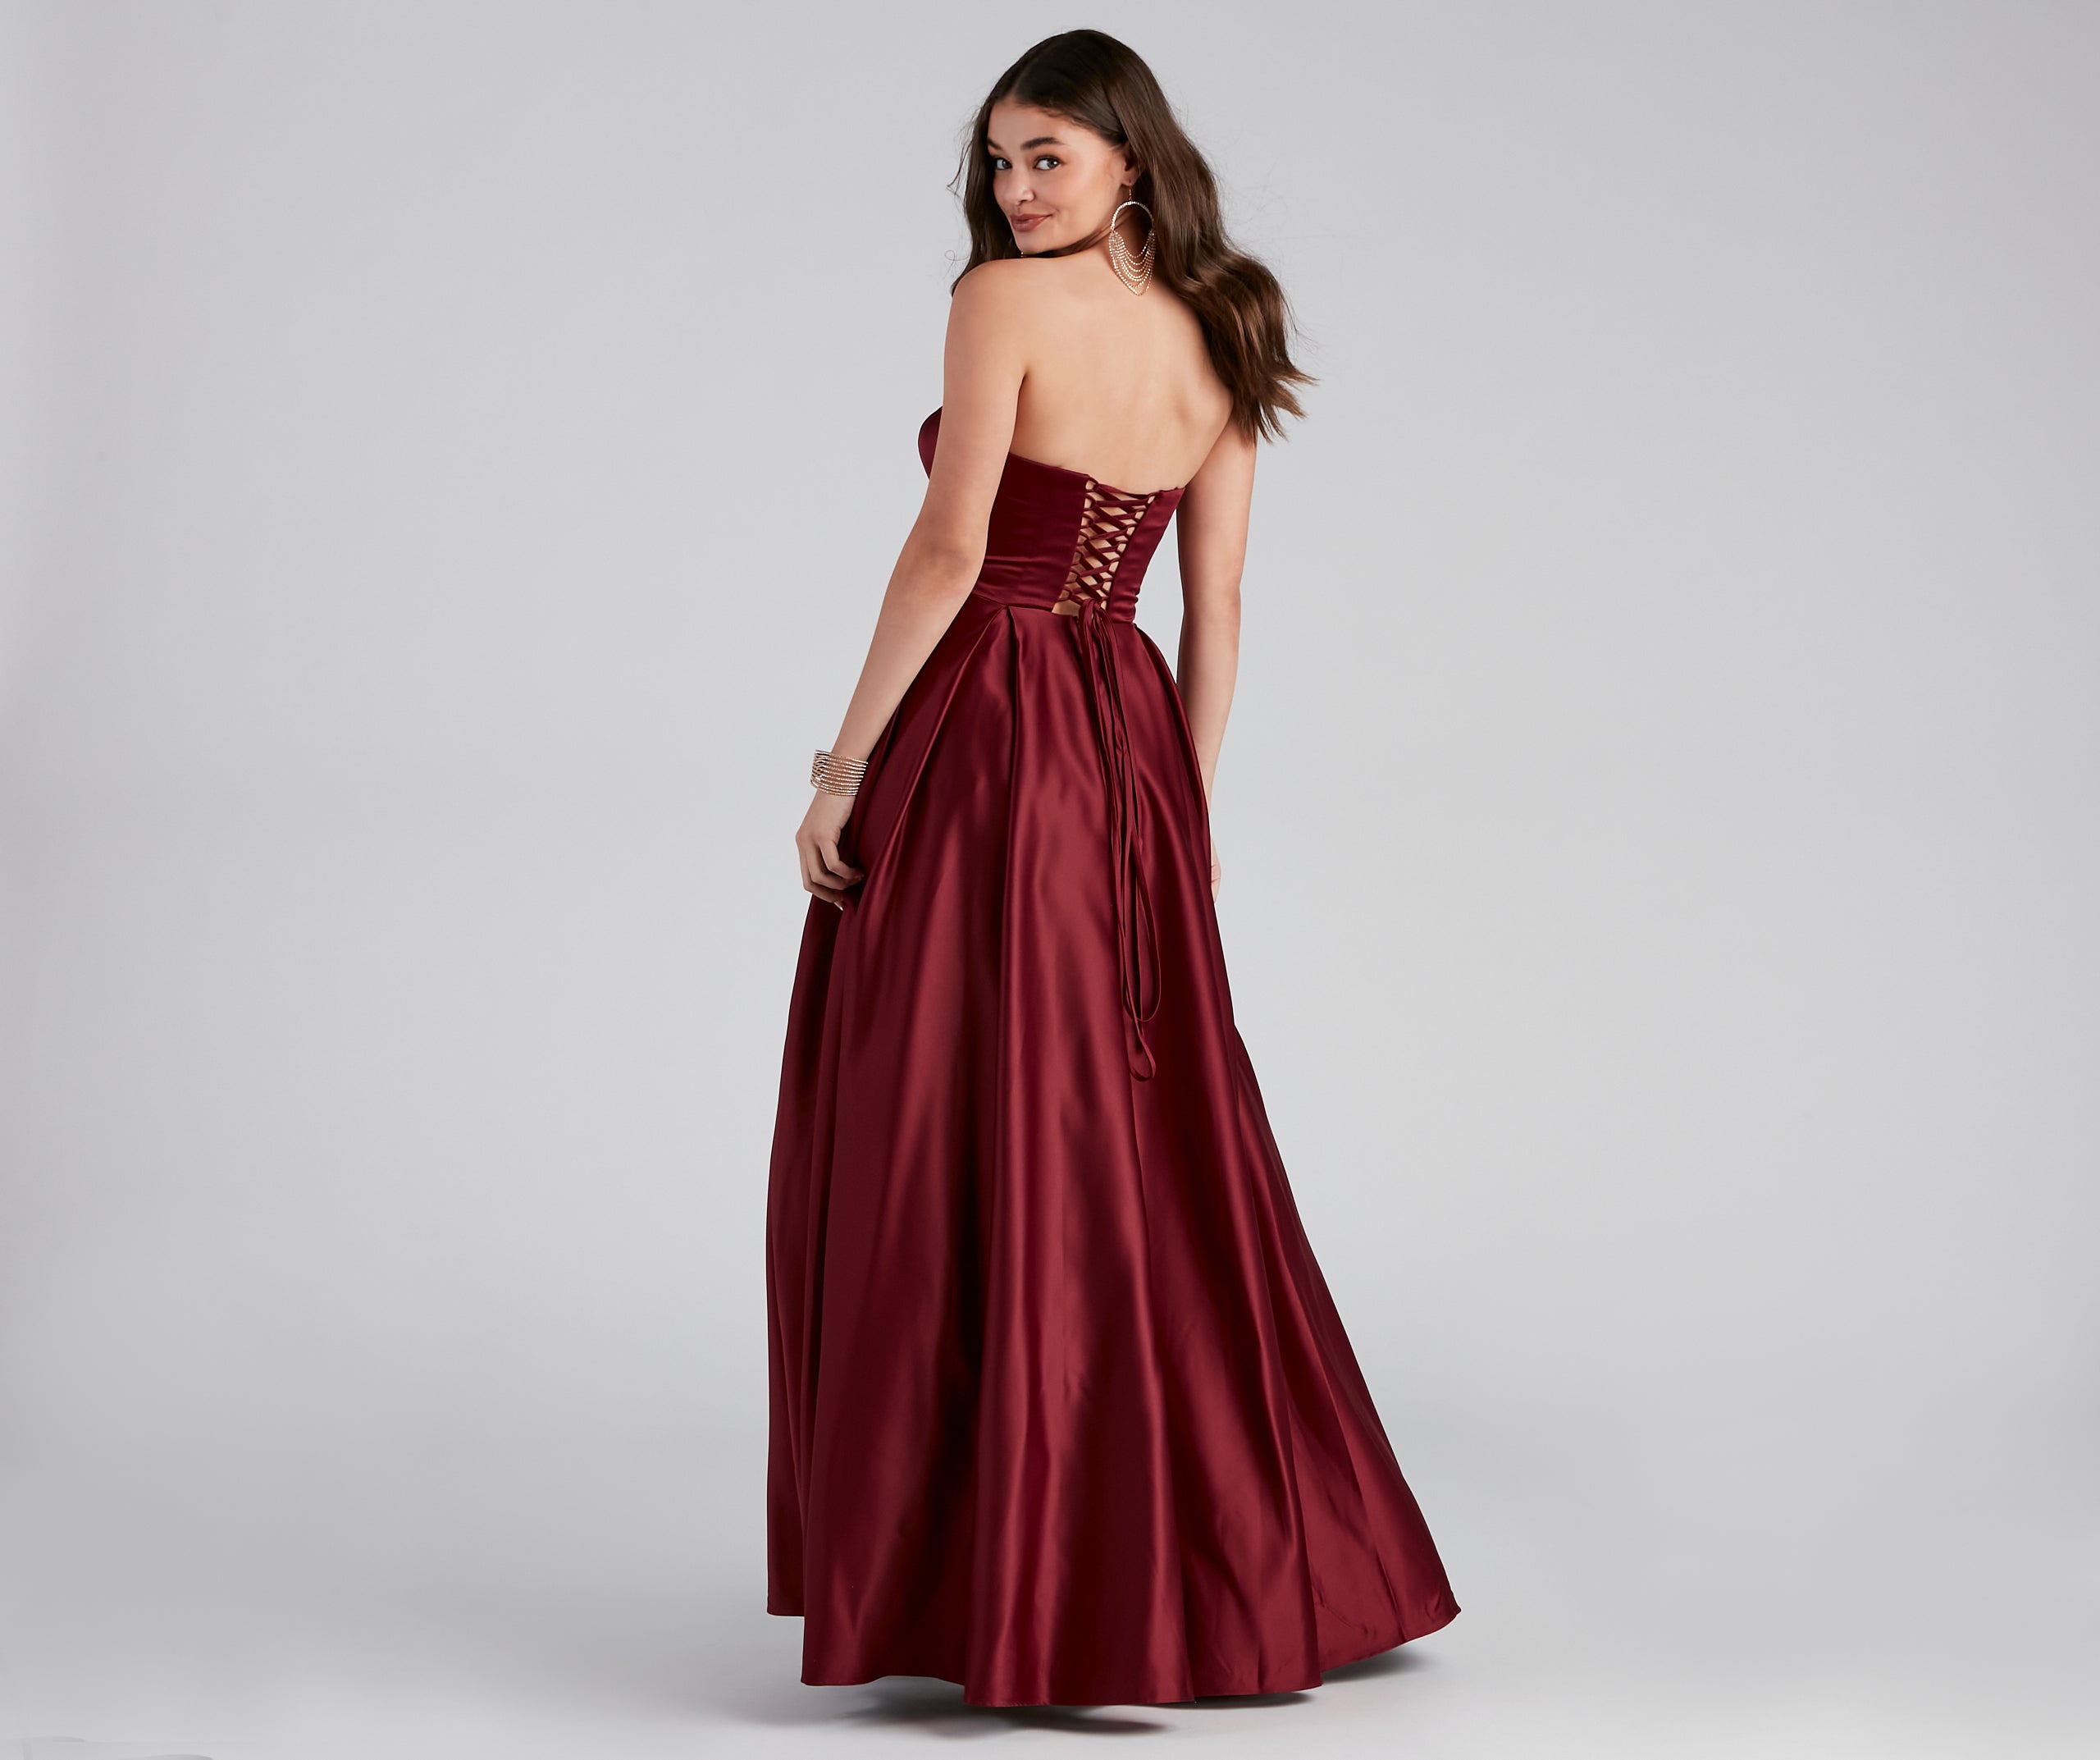 Ellie Lace-Up Sequin Ball Gown